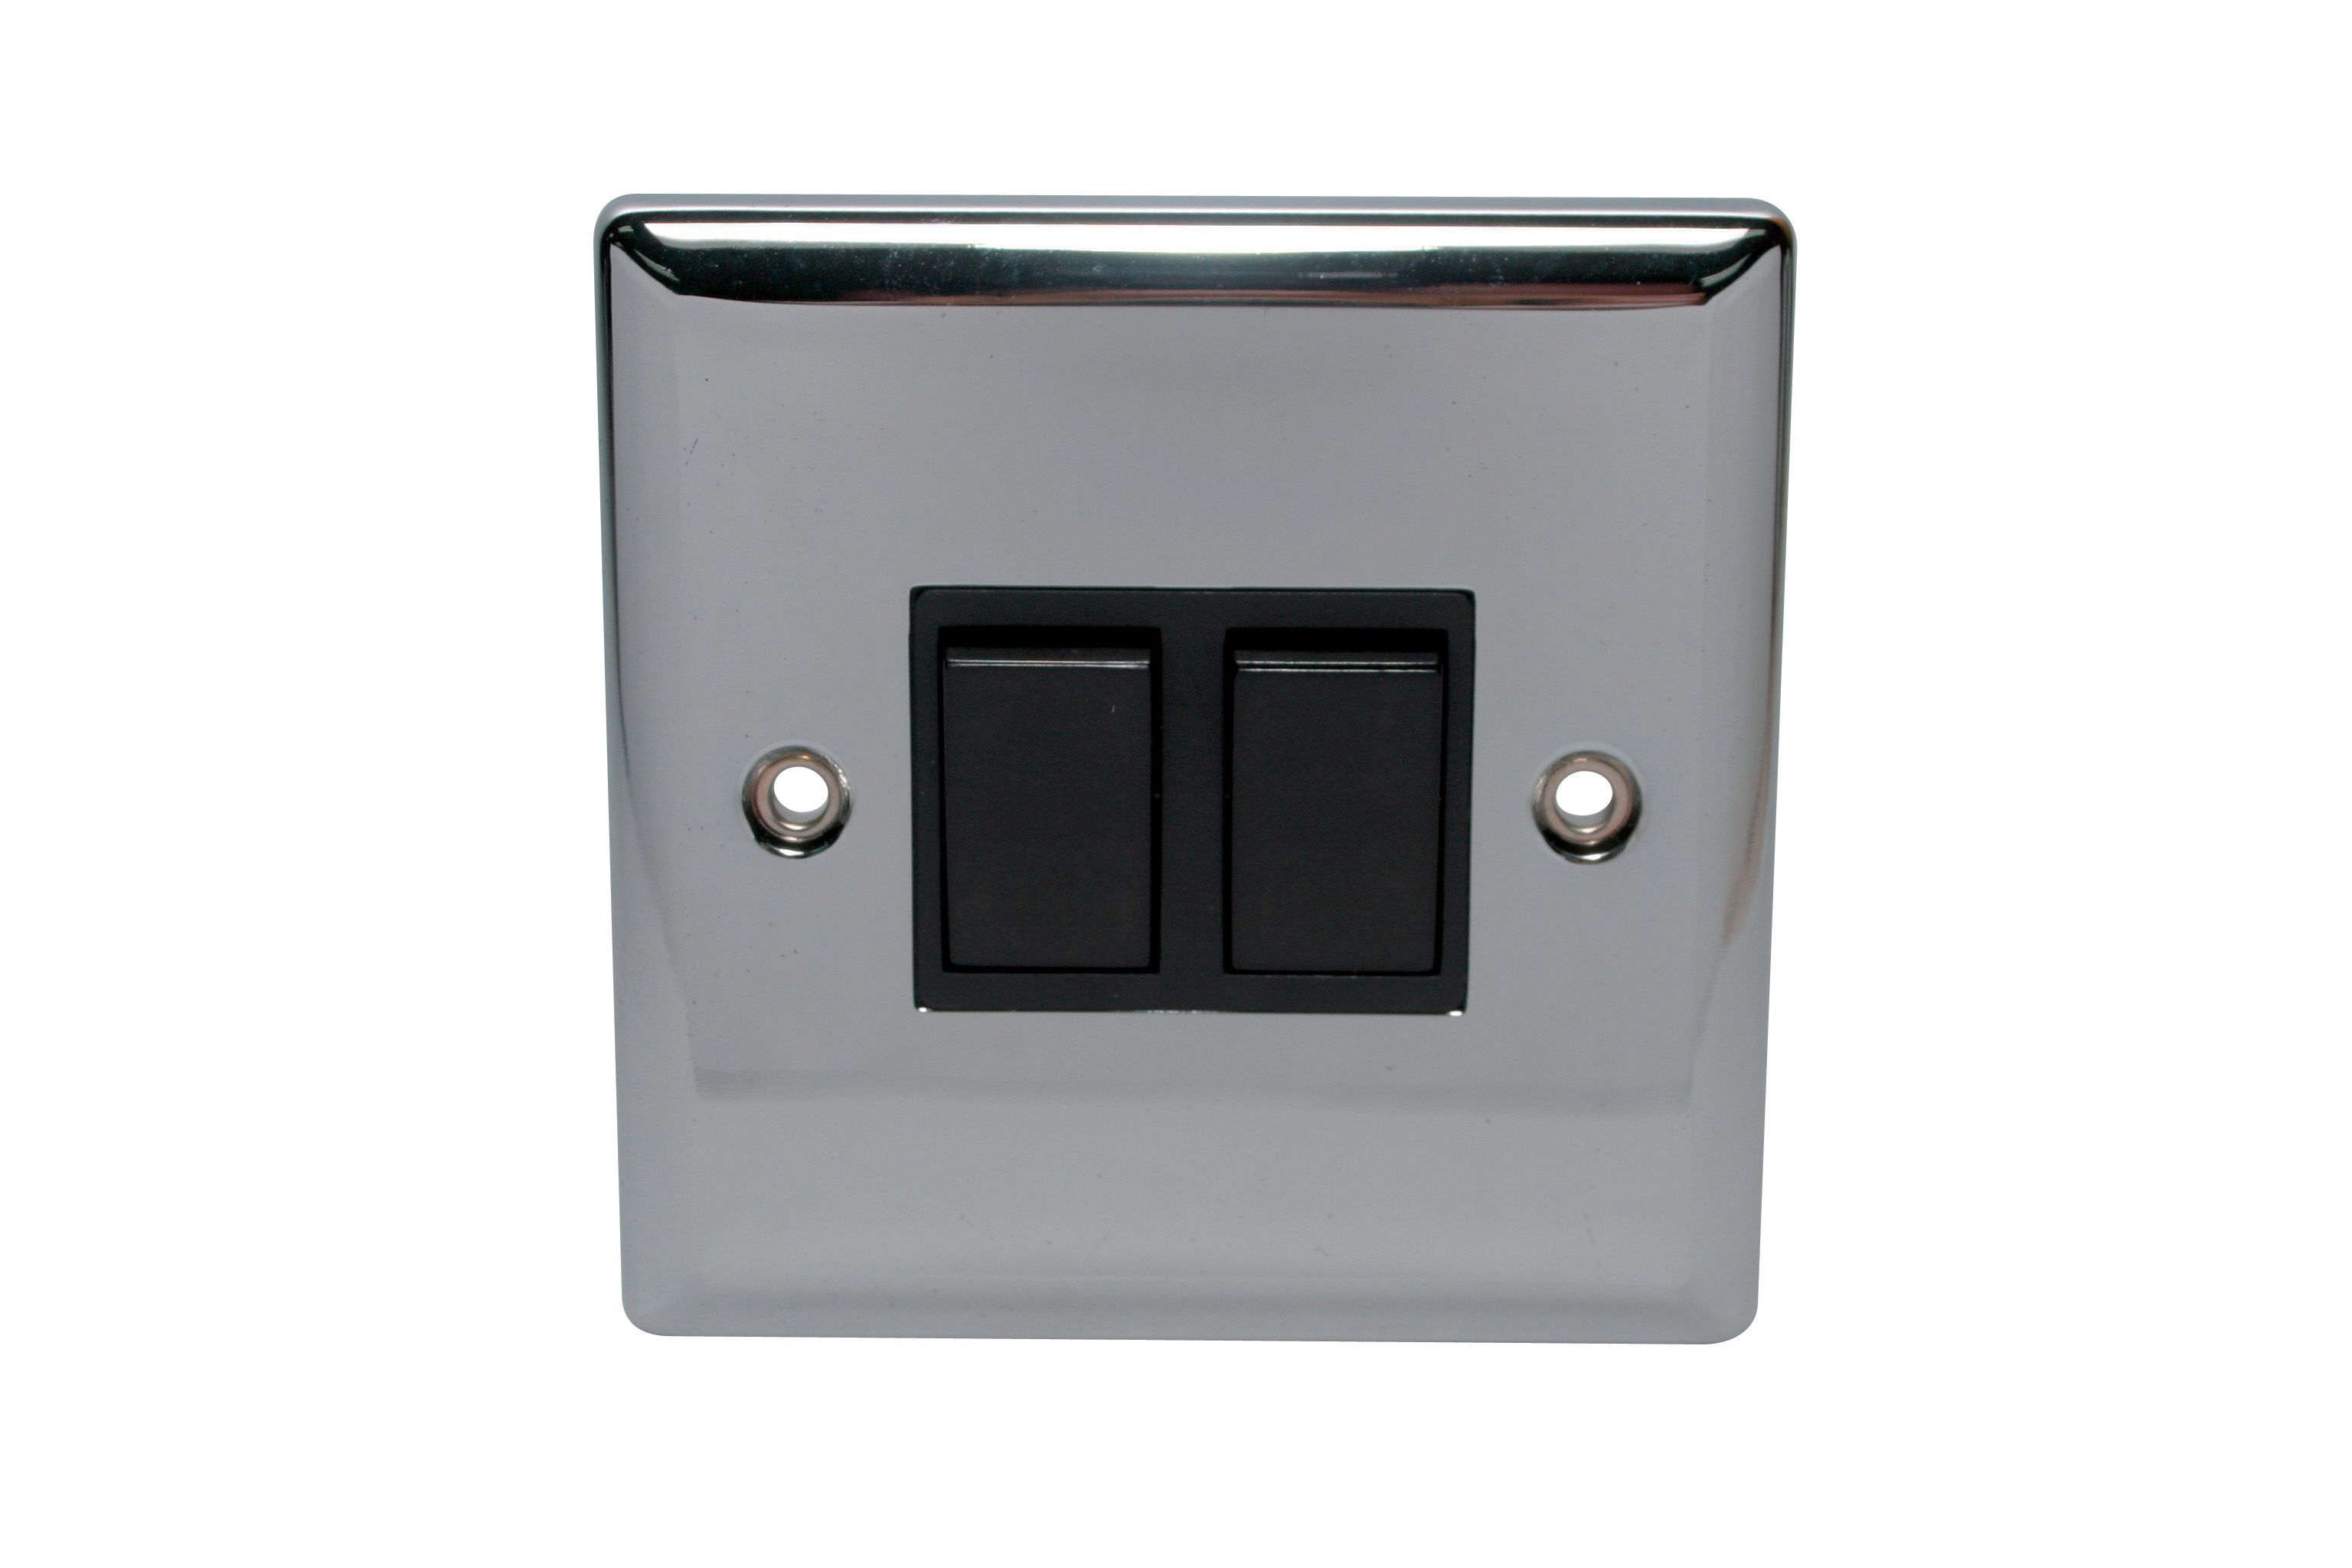 Holder 10A 2 way Chrome effect Double light Switch